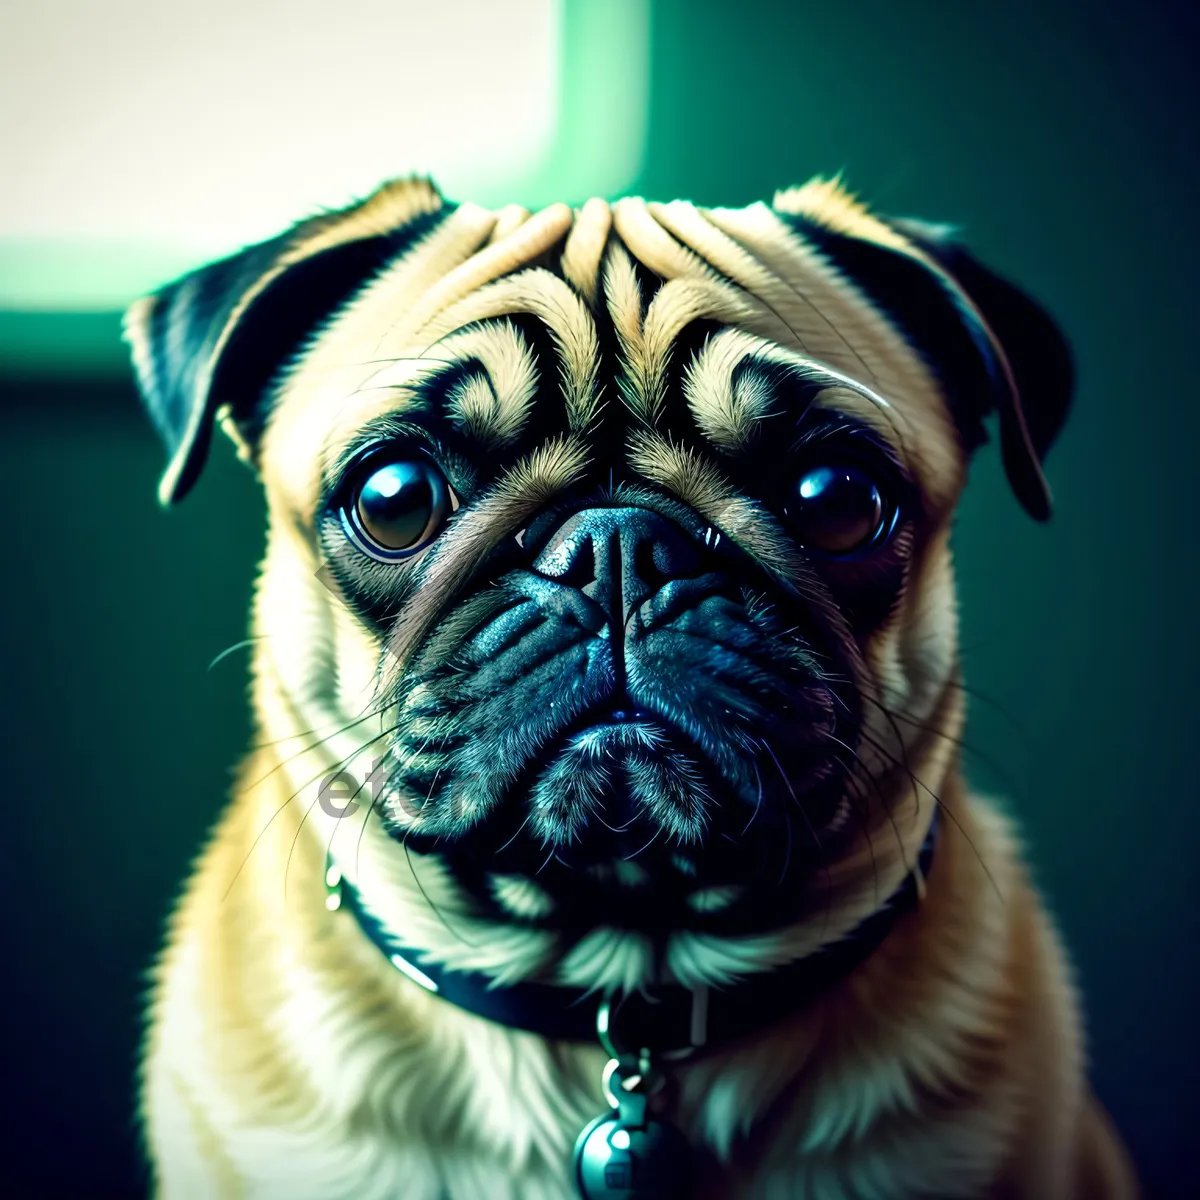 Picture of Cute Pug Puppy: Adorable Purebred Canine with Wrinkles